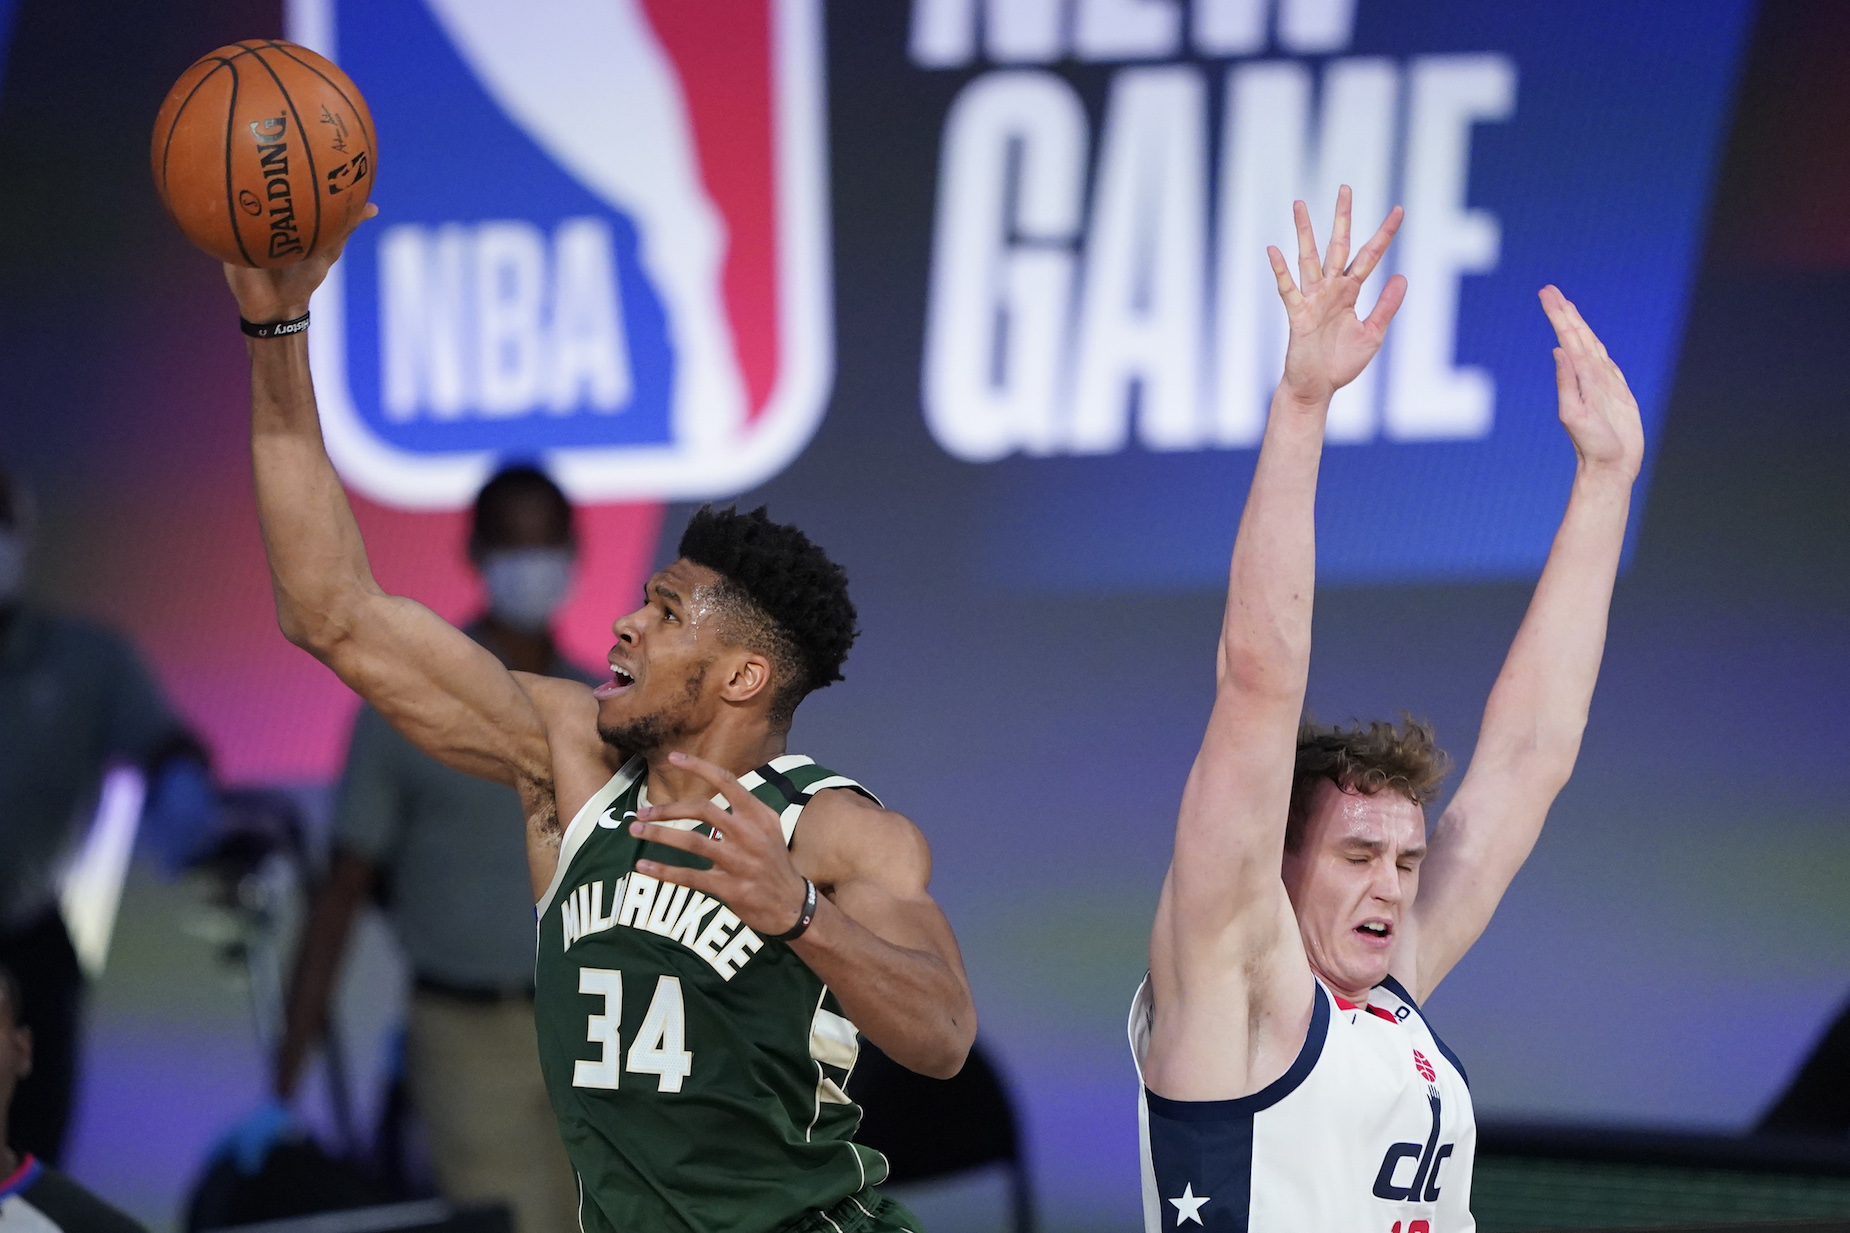 By headbutting his opponent, Giannis Antetokounmpo showed a human side to his game.